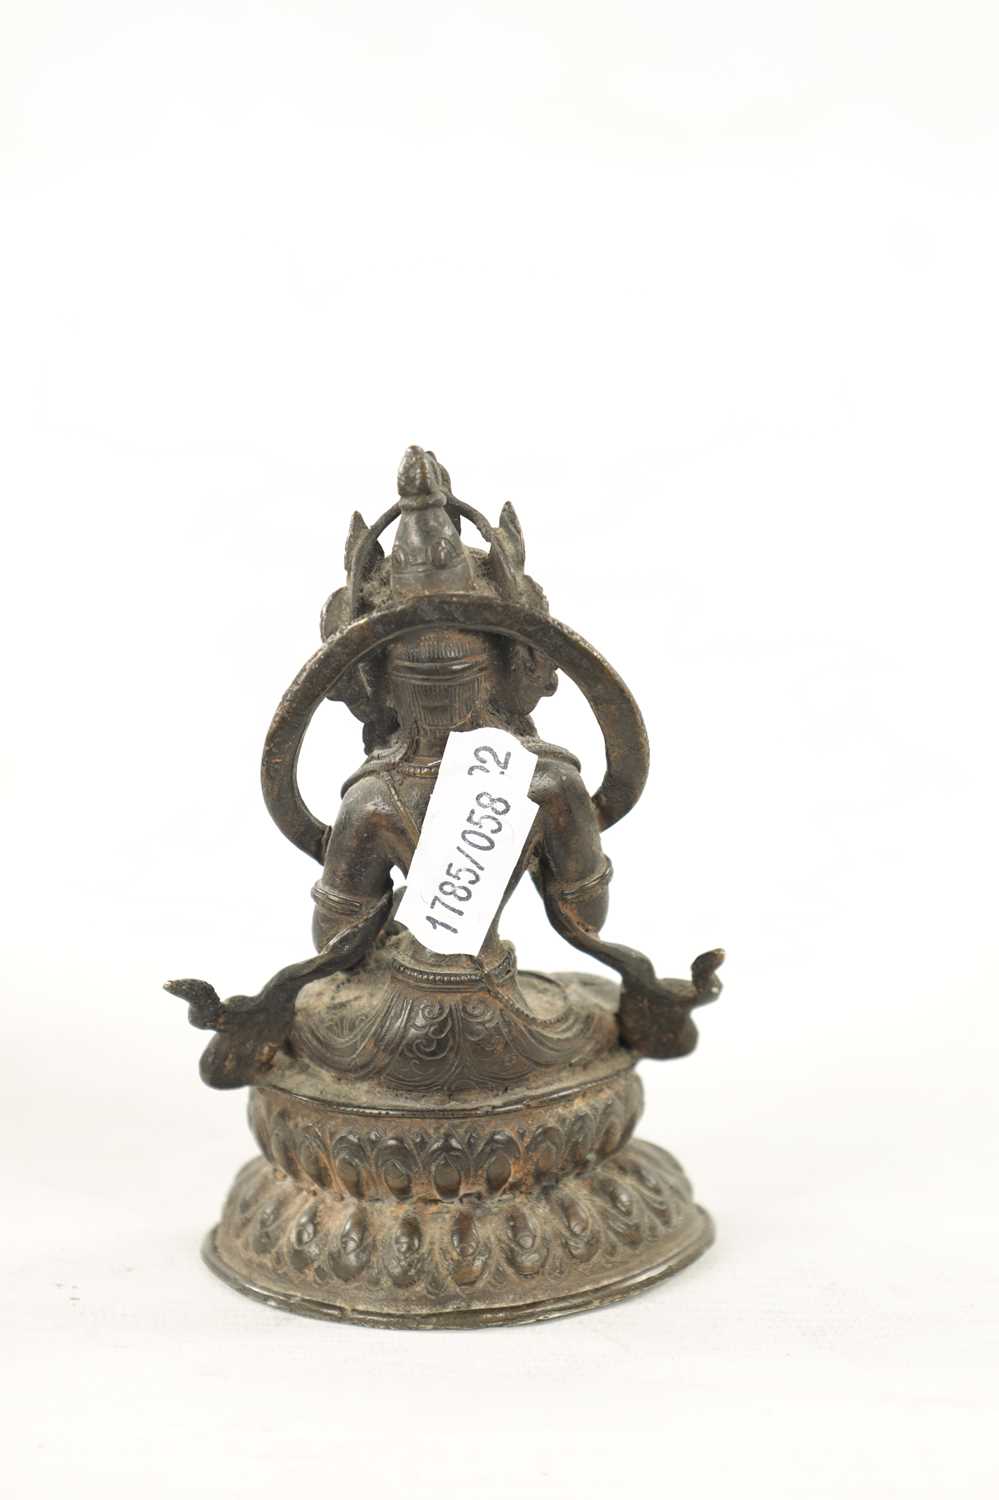 A 19TH CENTURY INDIAN TIBETAN BRONZE FIGURE OF A SEATED BUDDHA - Image 5 of 6